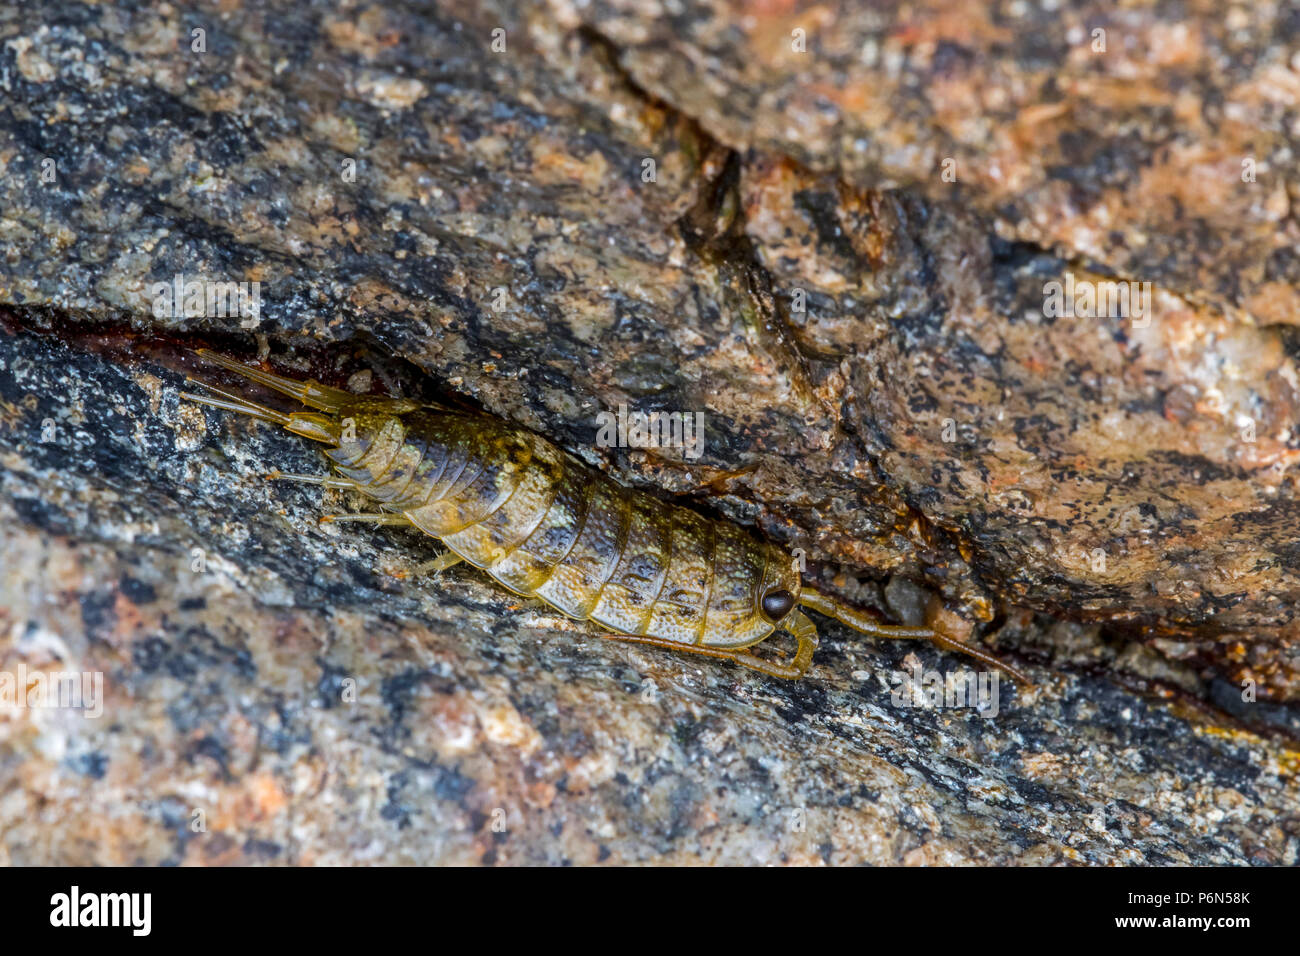 Common sea slater / sea roach (Ligia oceanica), littoral woodlouse and one of the largest oniscid isopods in rock crevice along rock pool on beach Stock Photo